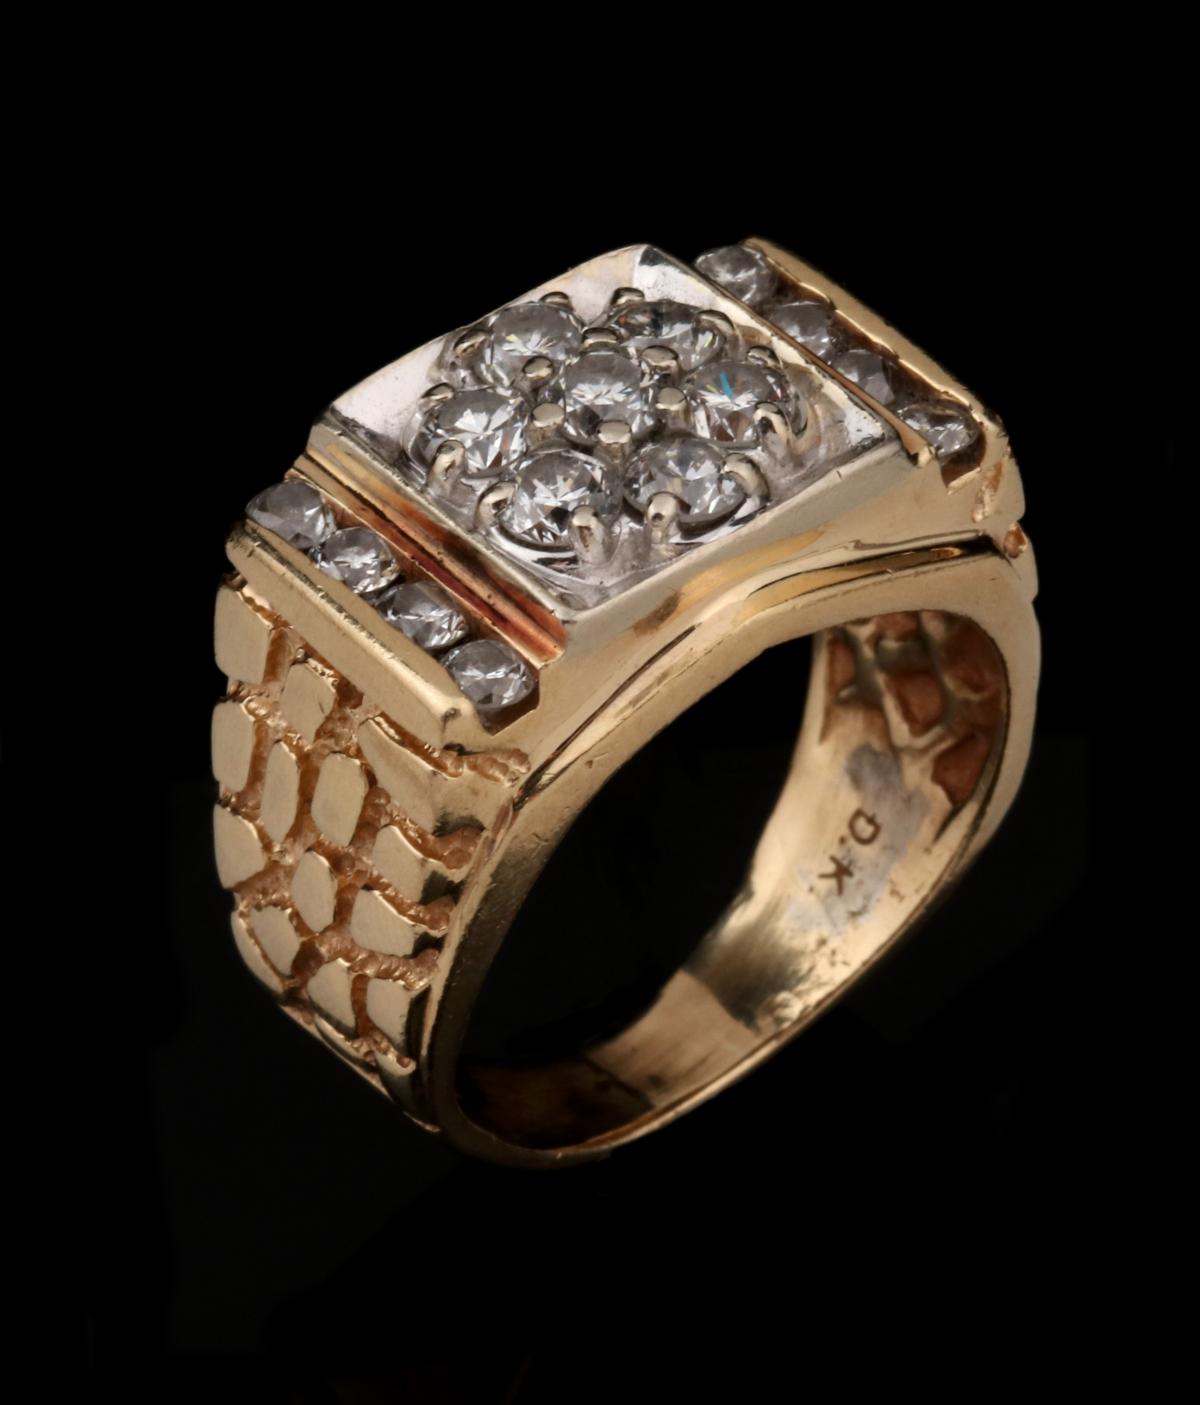 A GENT'S 14K GOLD AND DIAMOND RING, 1.25 CARATS TW